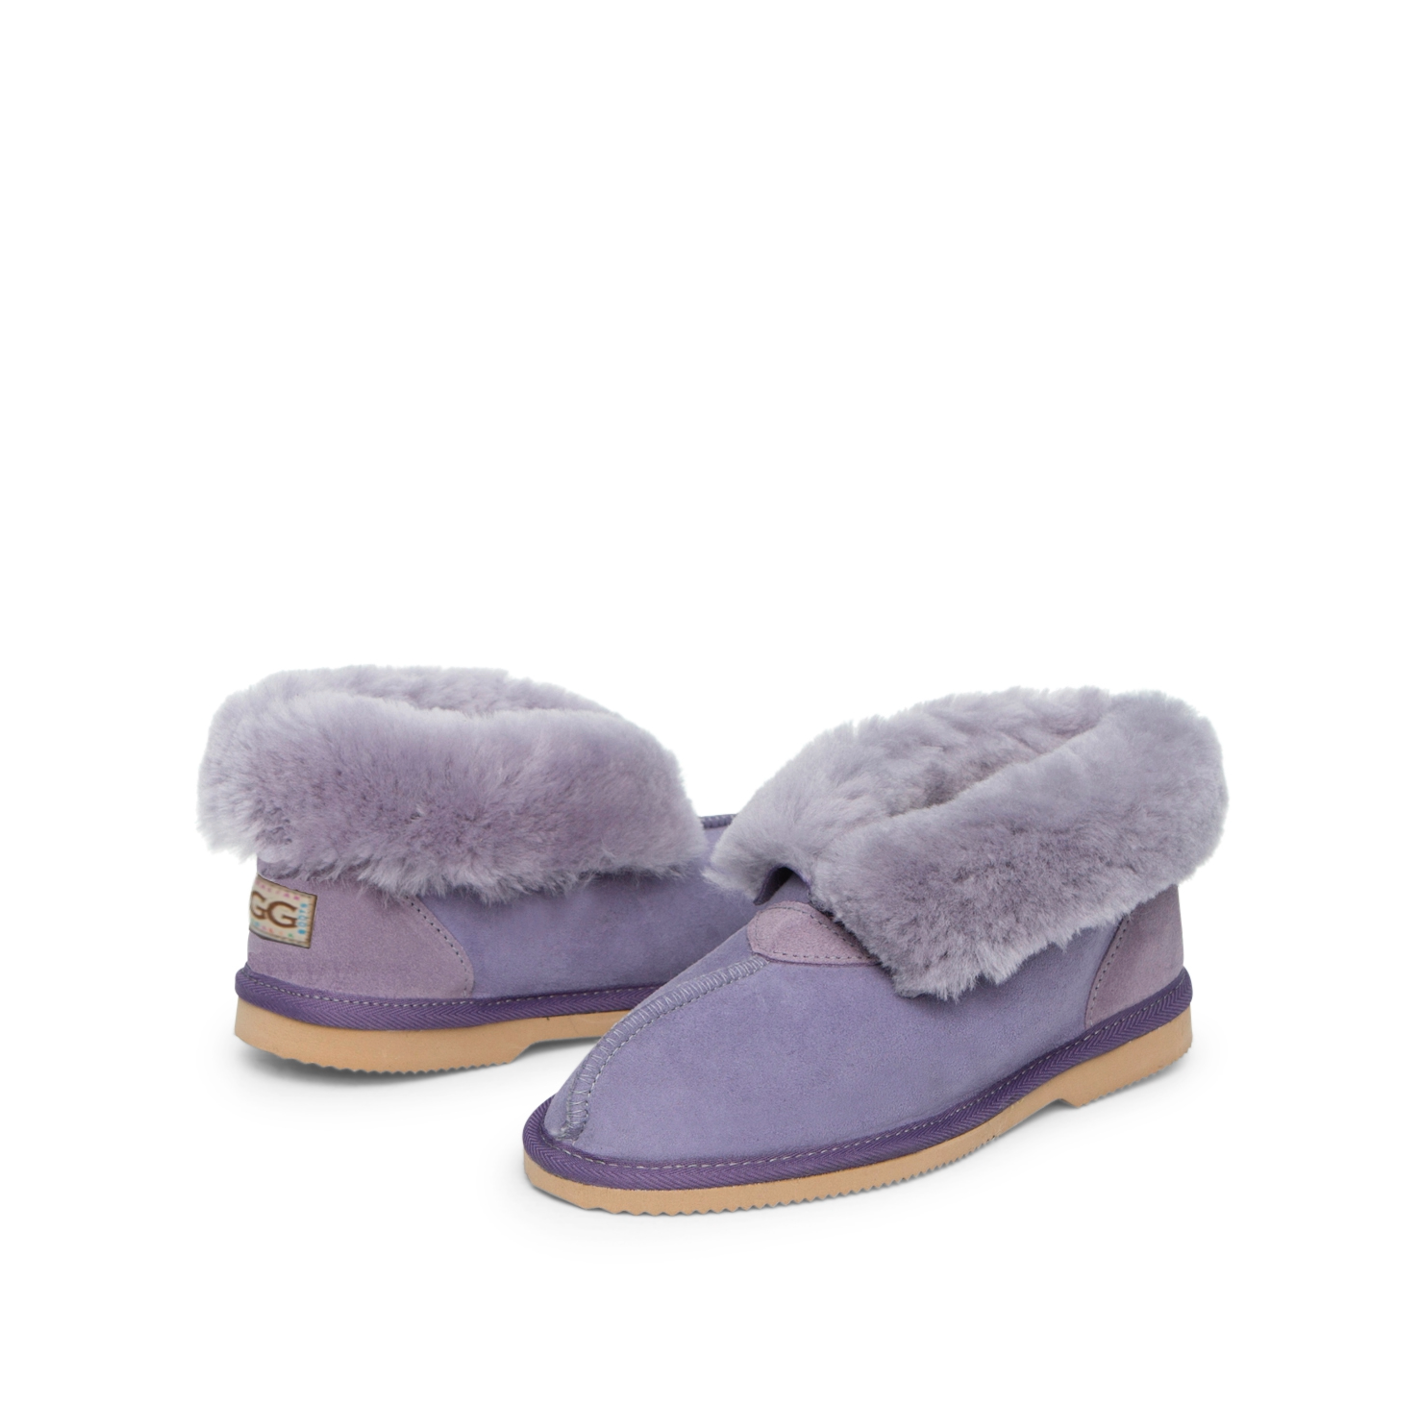 Kid's Ugg Slippers, with sheepskin rolled out at the top in Lilac